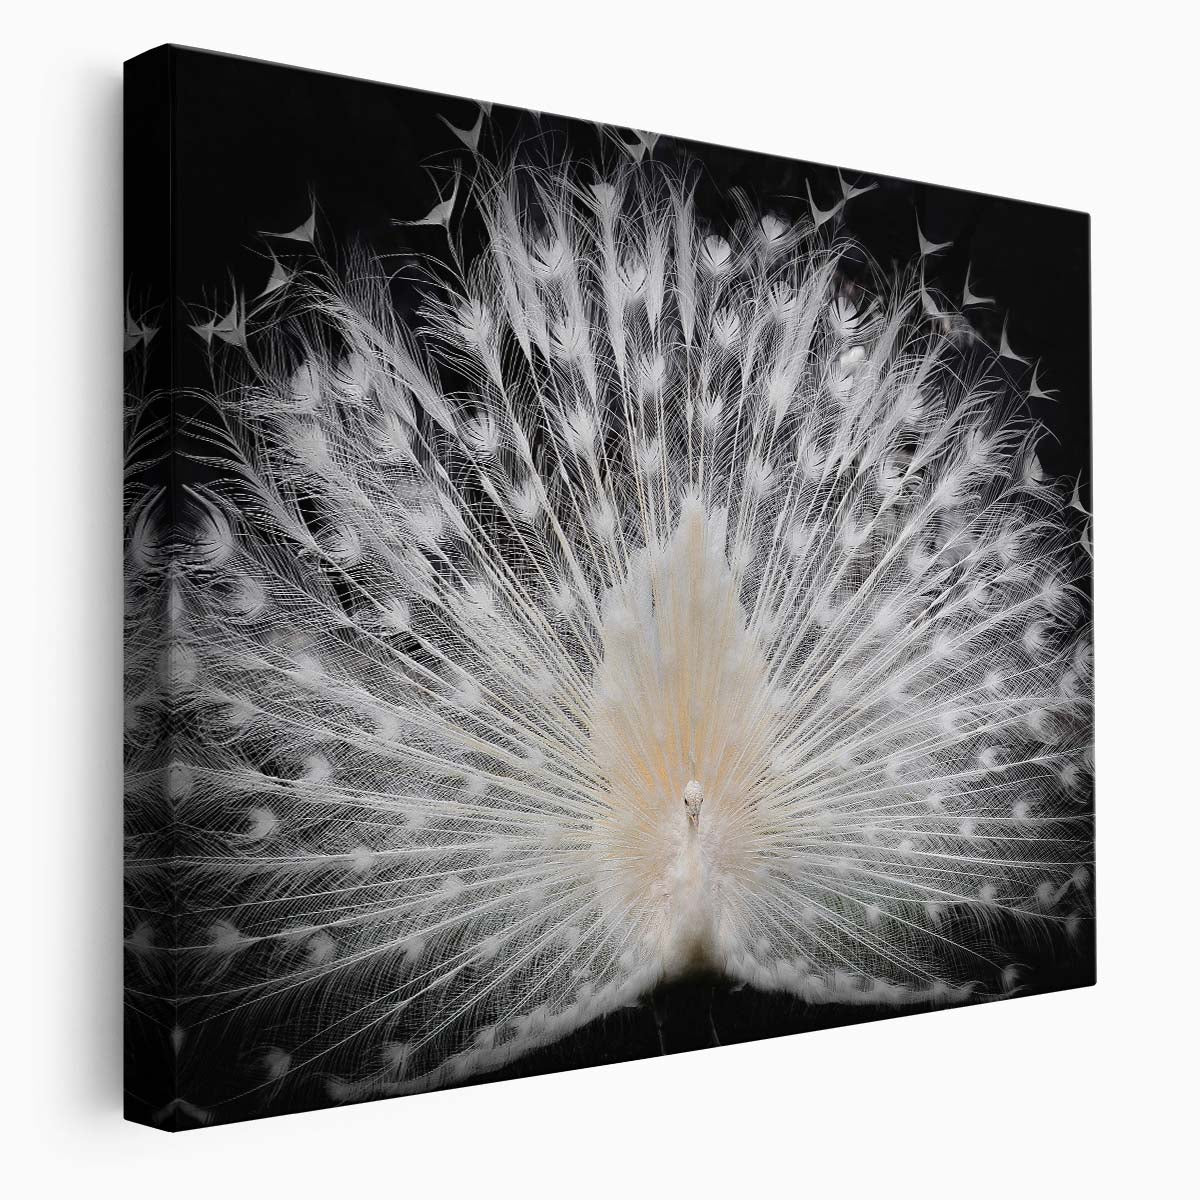 Italian Majestic White Peacock Feather Pattern Wall Art by Luxuriance Designs. Made in USA.